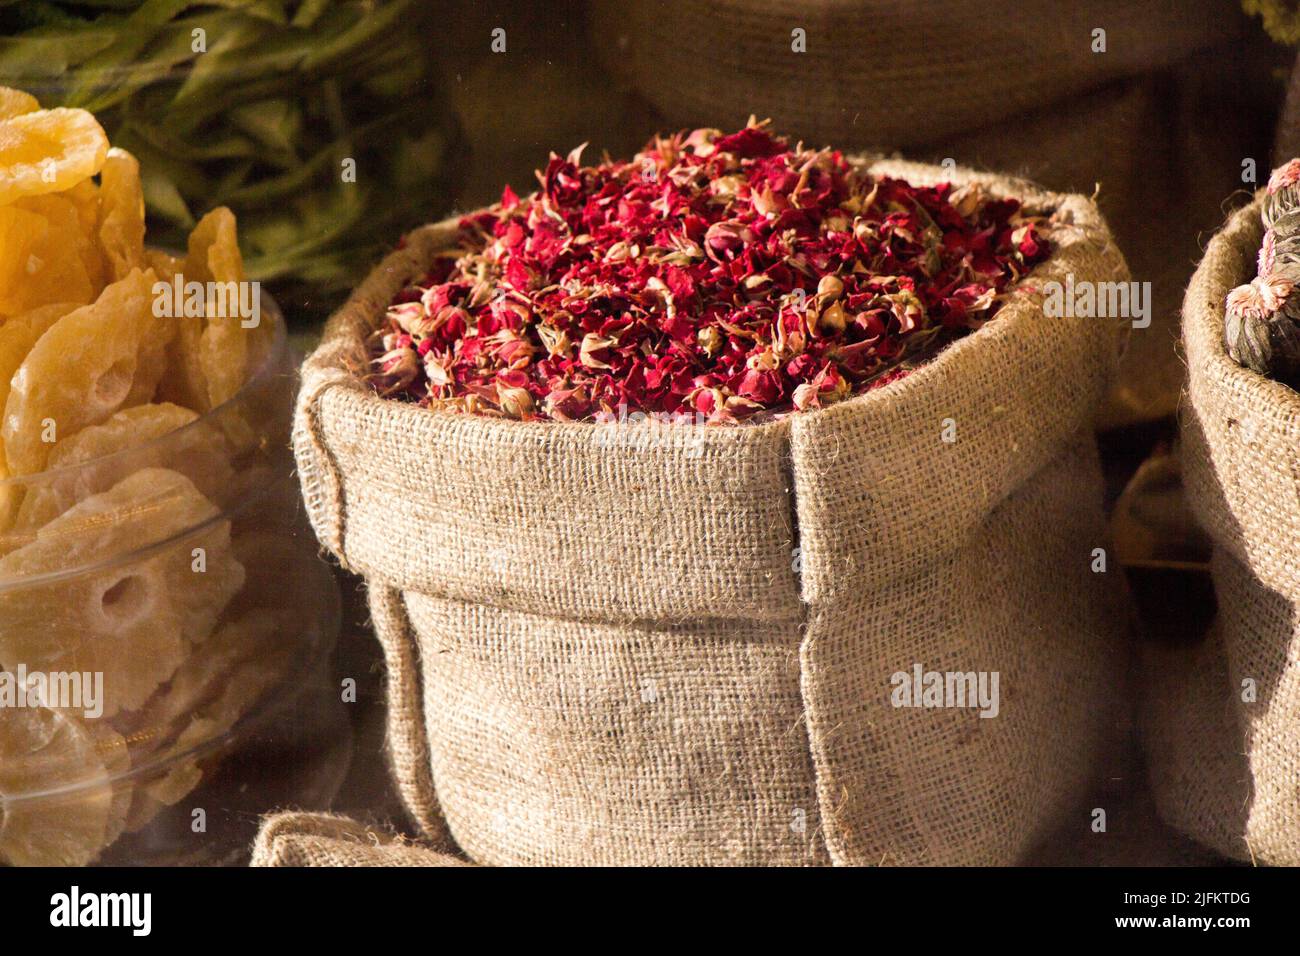 Dry herbal plants at in sacks at the market. Stock Photo